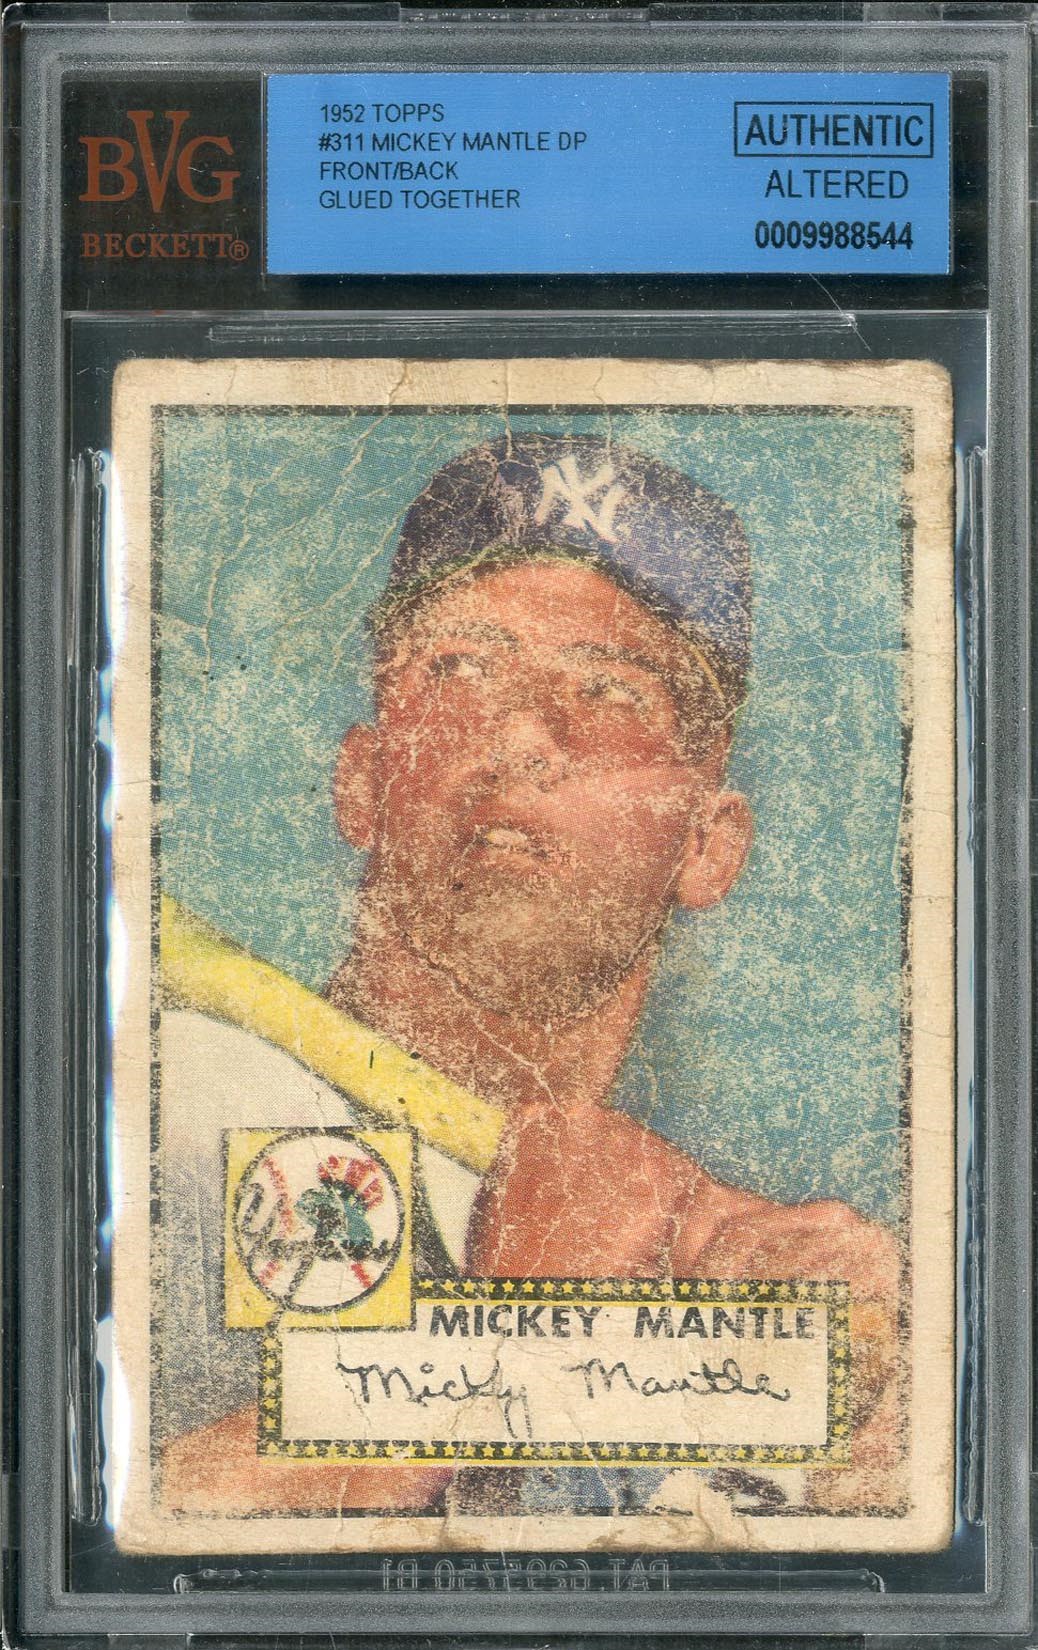 - Centered 1952 Topps #311 Mickey Mantle Rookie (BVG Authentic)